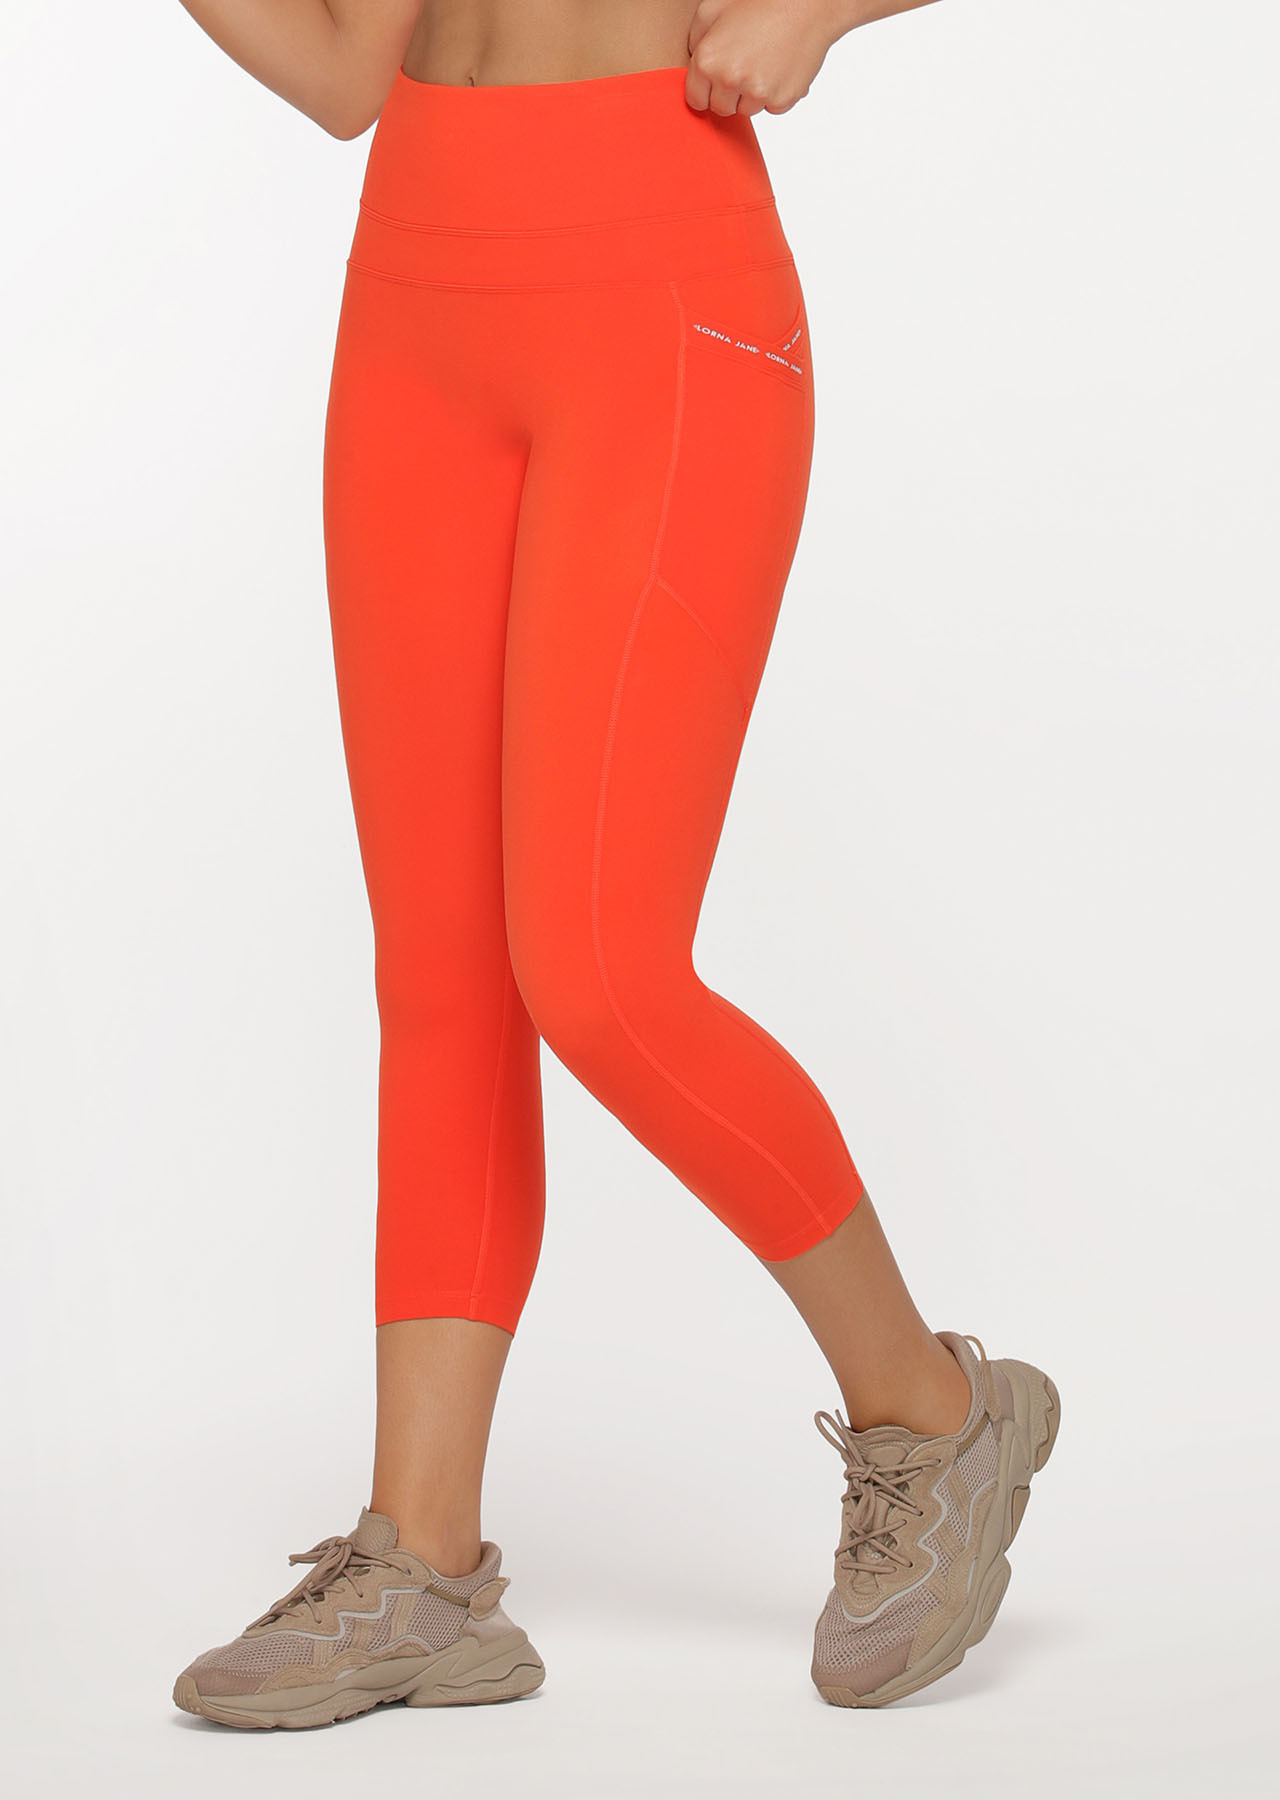 Womens Lorna Jane Leggings Cheapest Price - Smooth Booty Support